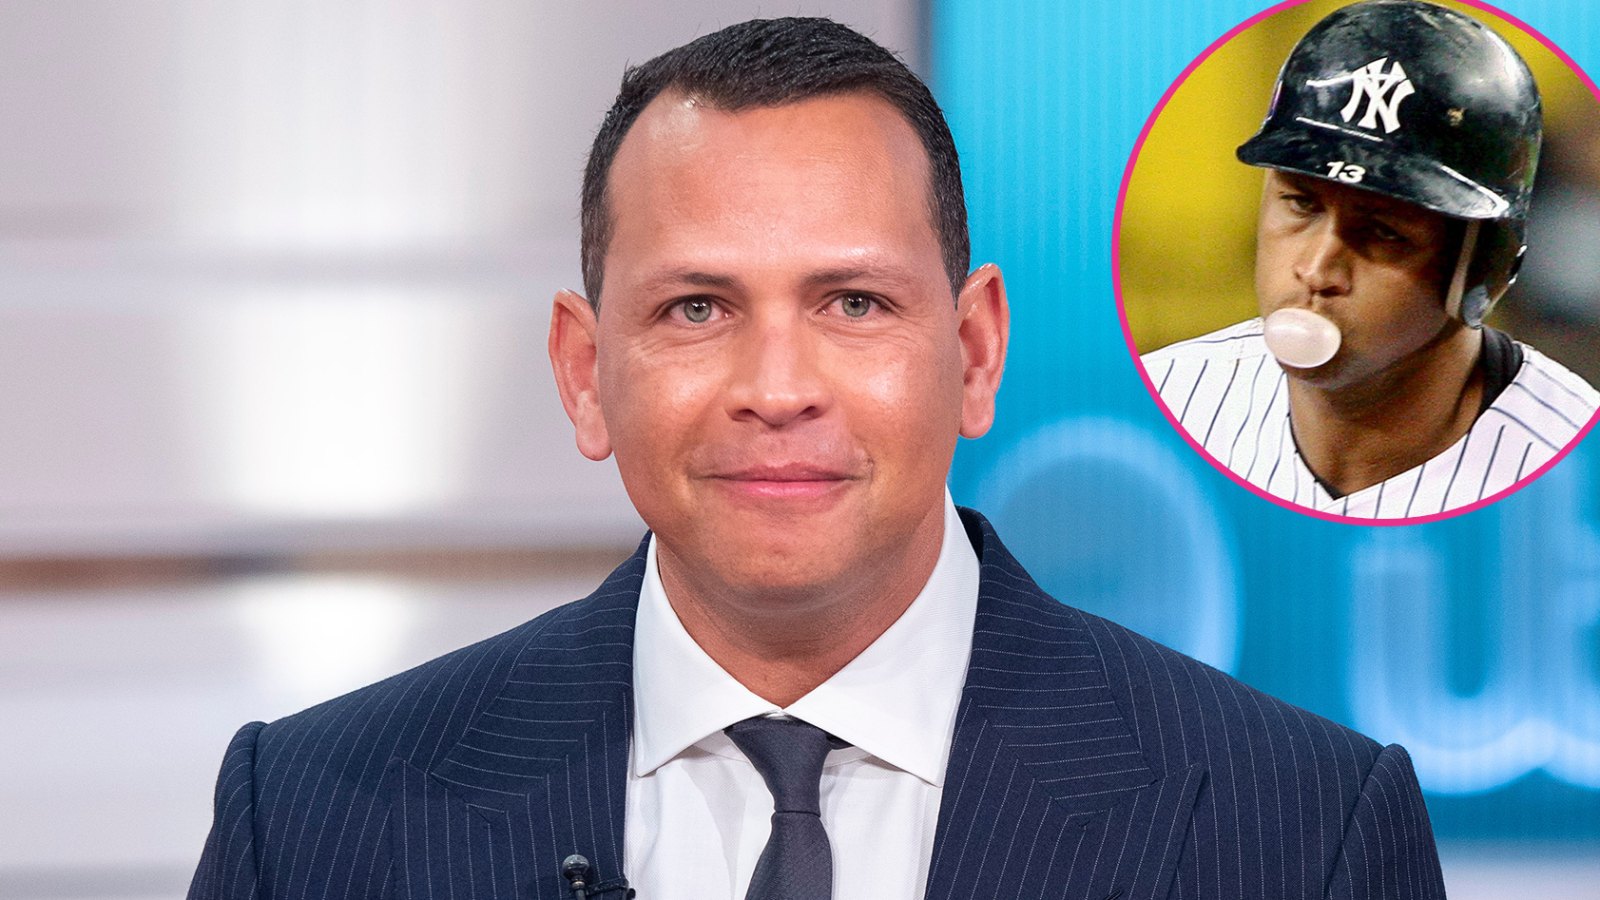 Alex Rodriguez Would Go Through 36 Pieces of Gum ‘Every Game’ He Played in MLB